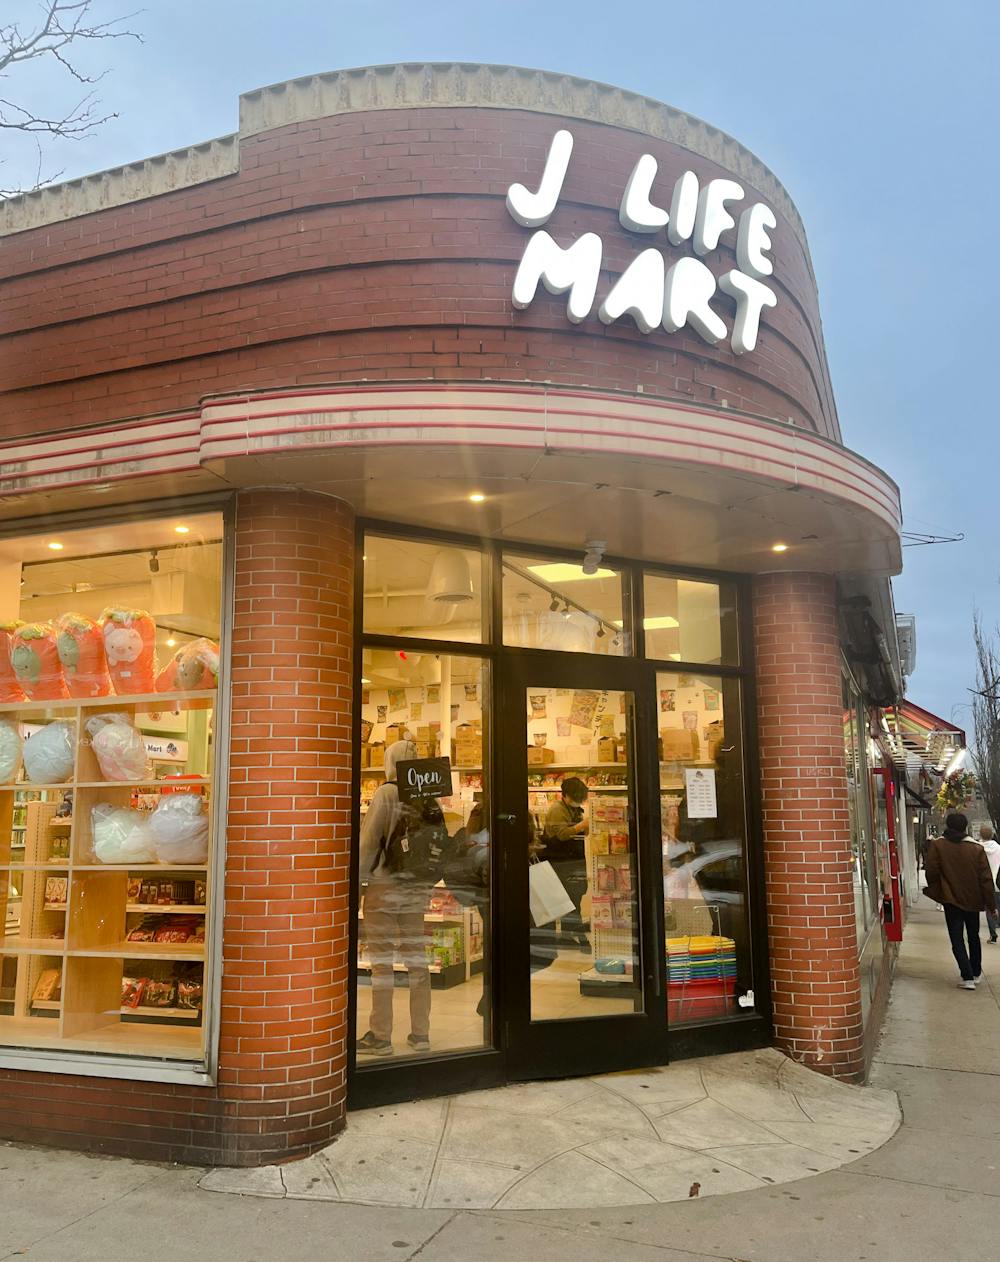 J Life Mart is located on 231 Thayer St. and greets patrons with colorful shopping baskets they can use to shop for Asian snacks and goods.